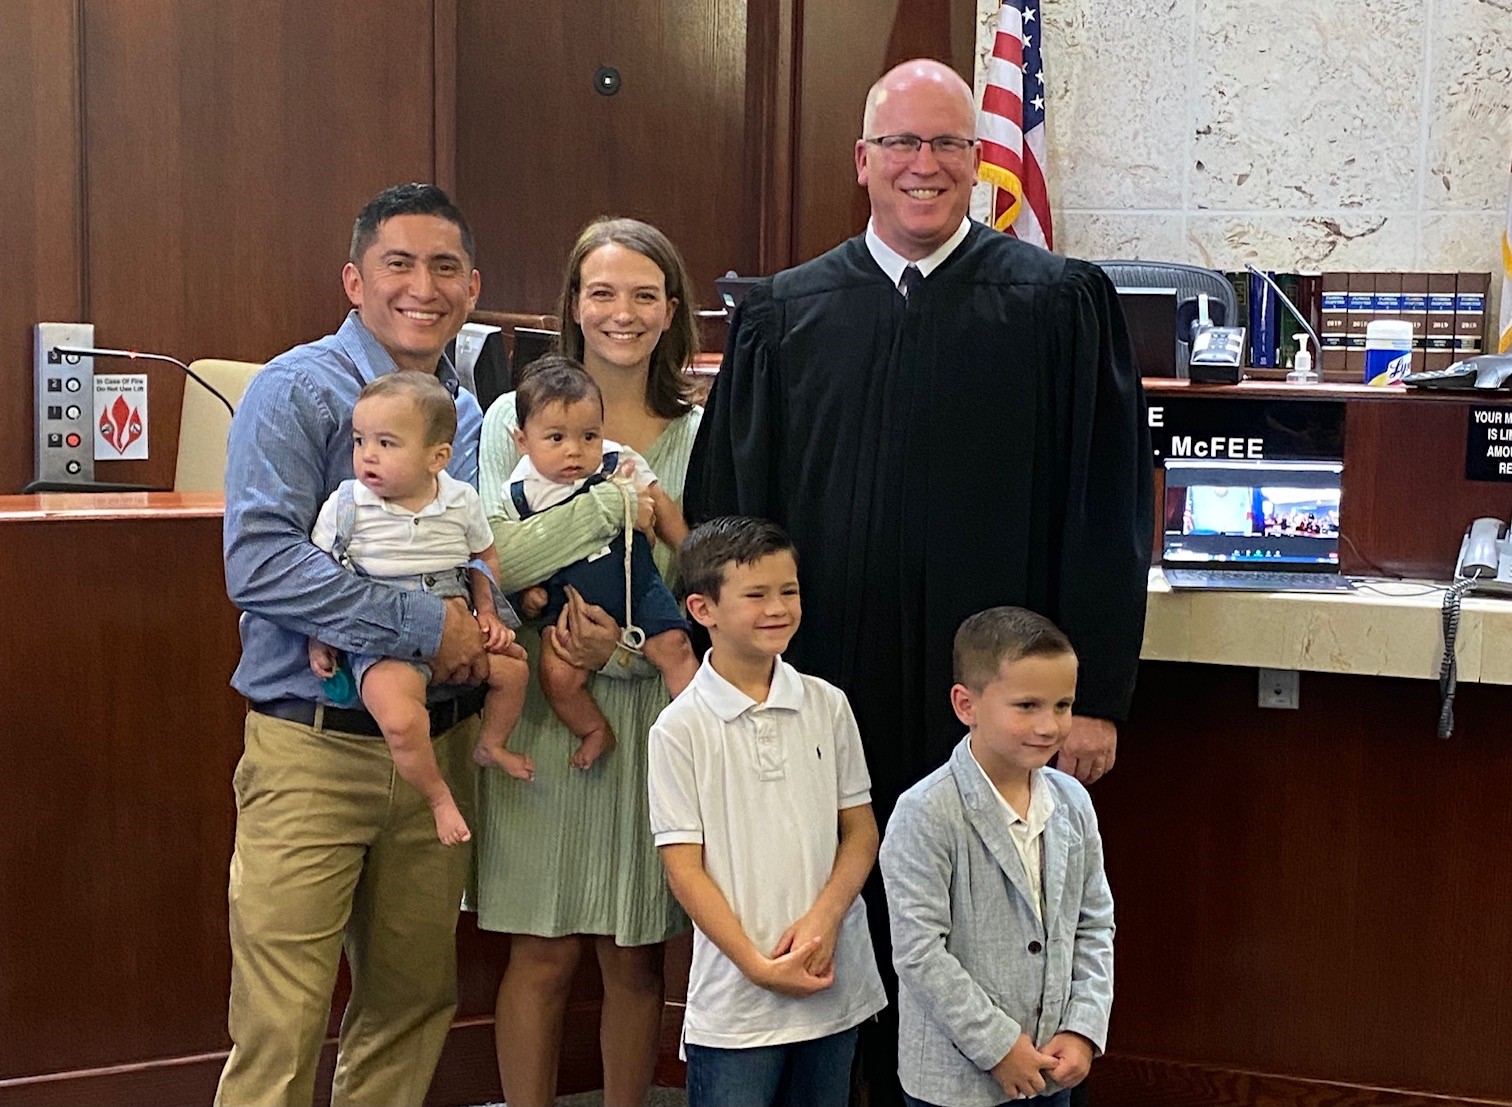 Judge Shannon McFee pictured with a family in Collier County